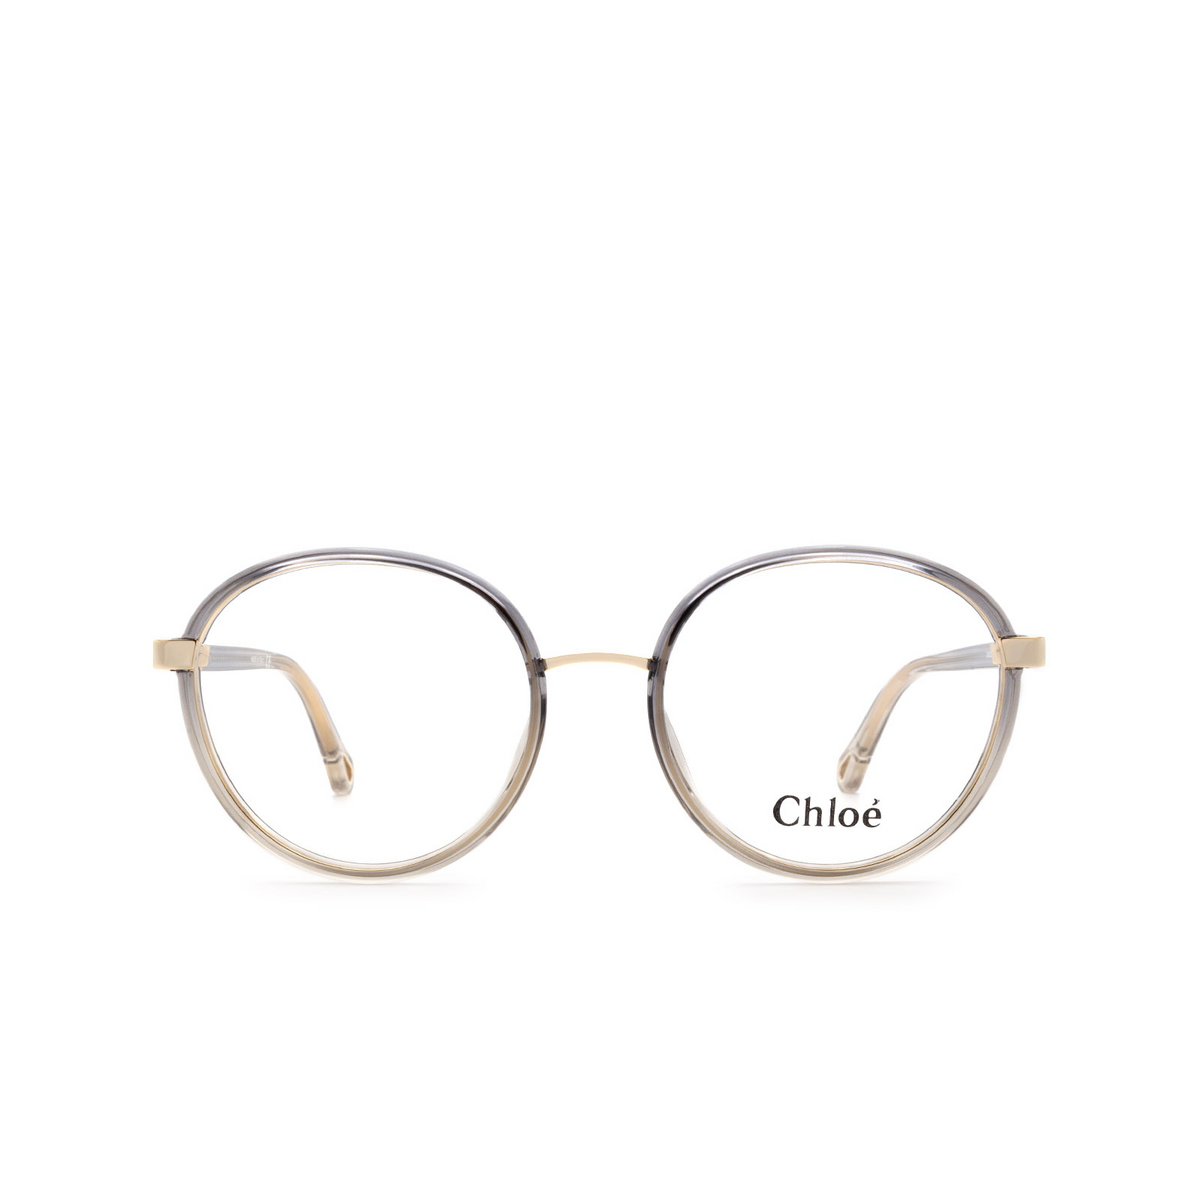 Chloé® Round Eyeglasses: CH0033O color 002 Grey - front view